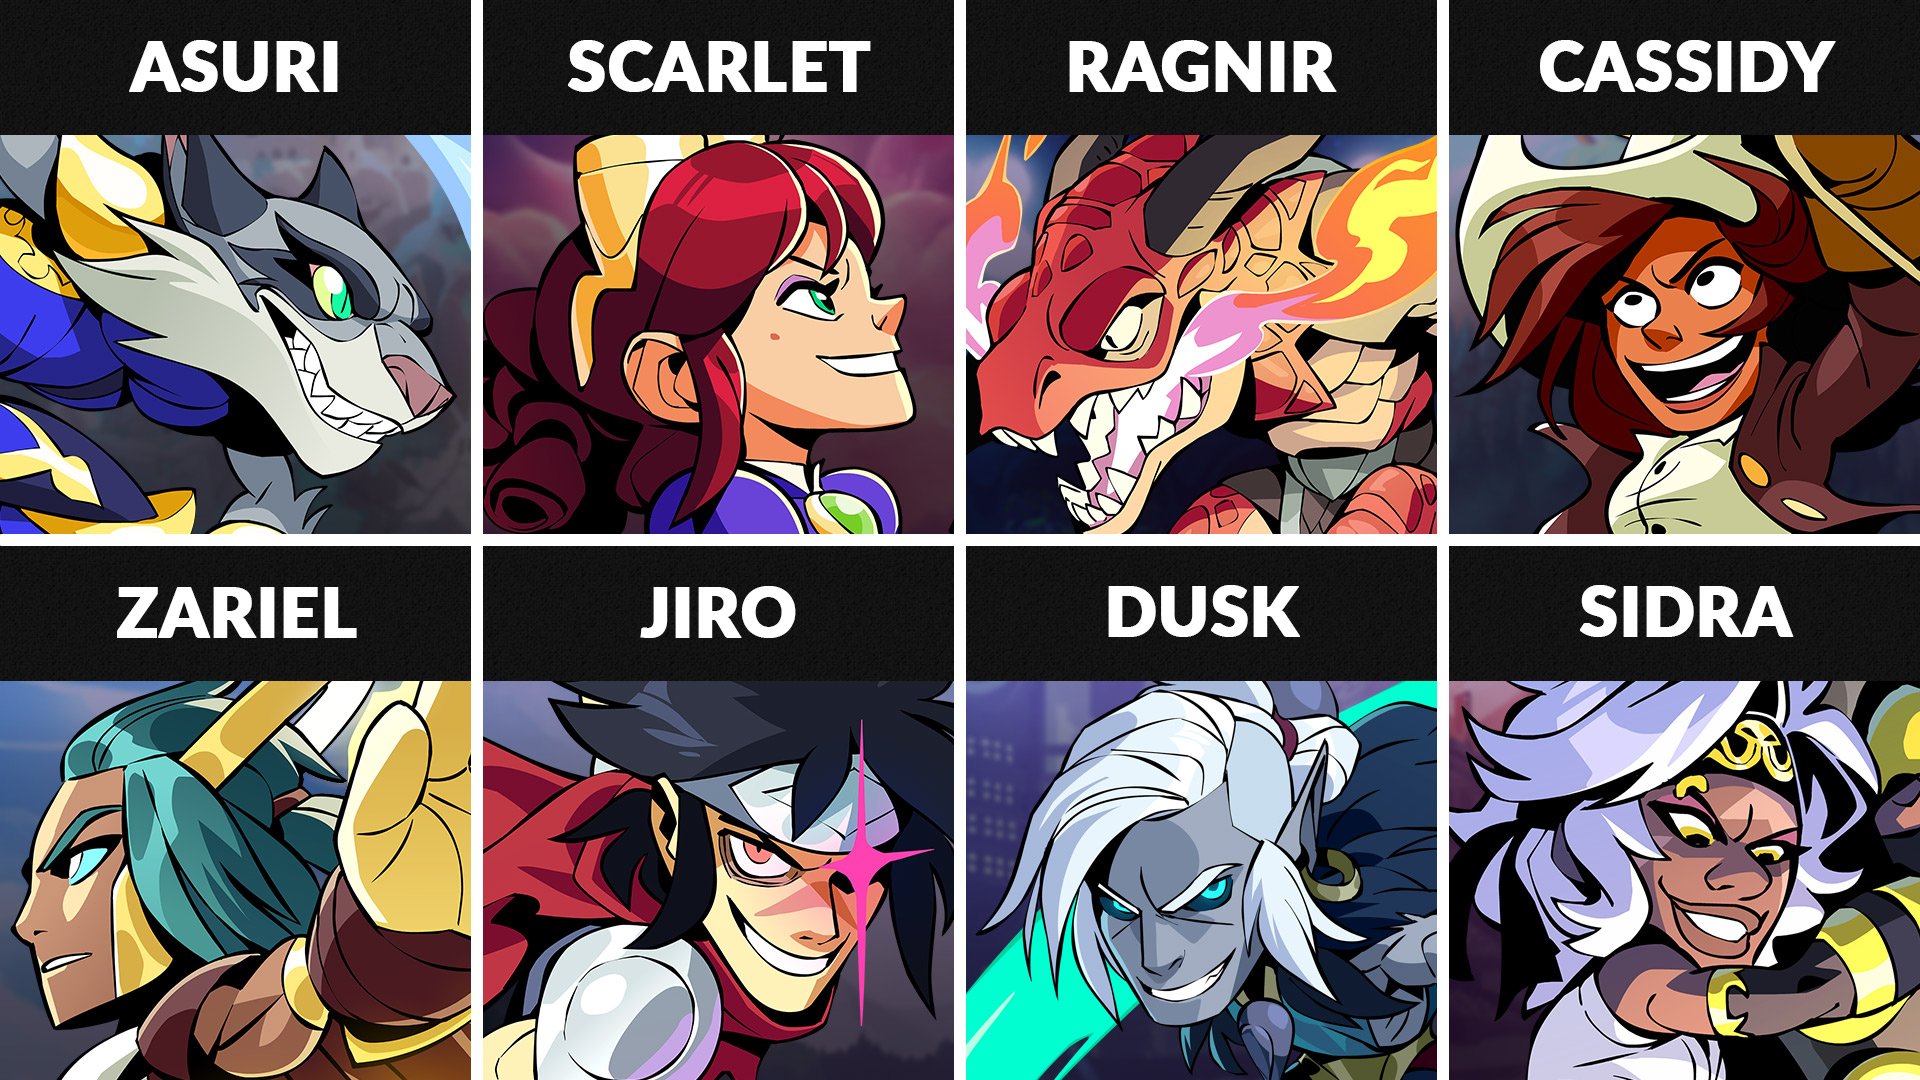 Brawlhalla on Twitter: "Today we updated which Legends are in our free rotation. We've changed the Brawl of the Week to Ghost in the Terminus! 📋Read more here: https://t.co/lCovwzL9eM https://t.co/Hv20tKu7yo" /